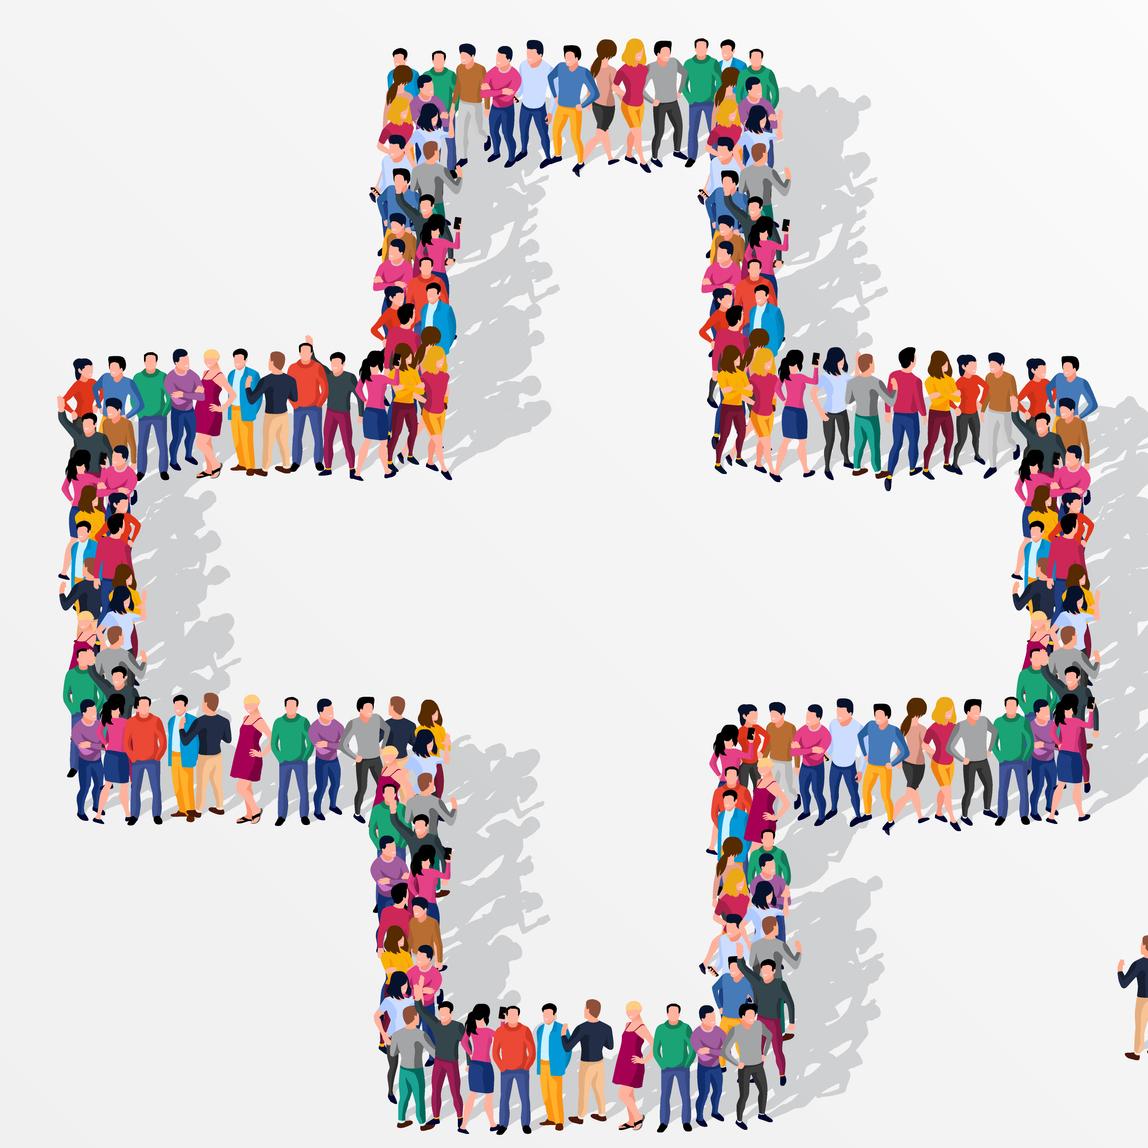 Illustration of a large group of people forming a health symbol